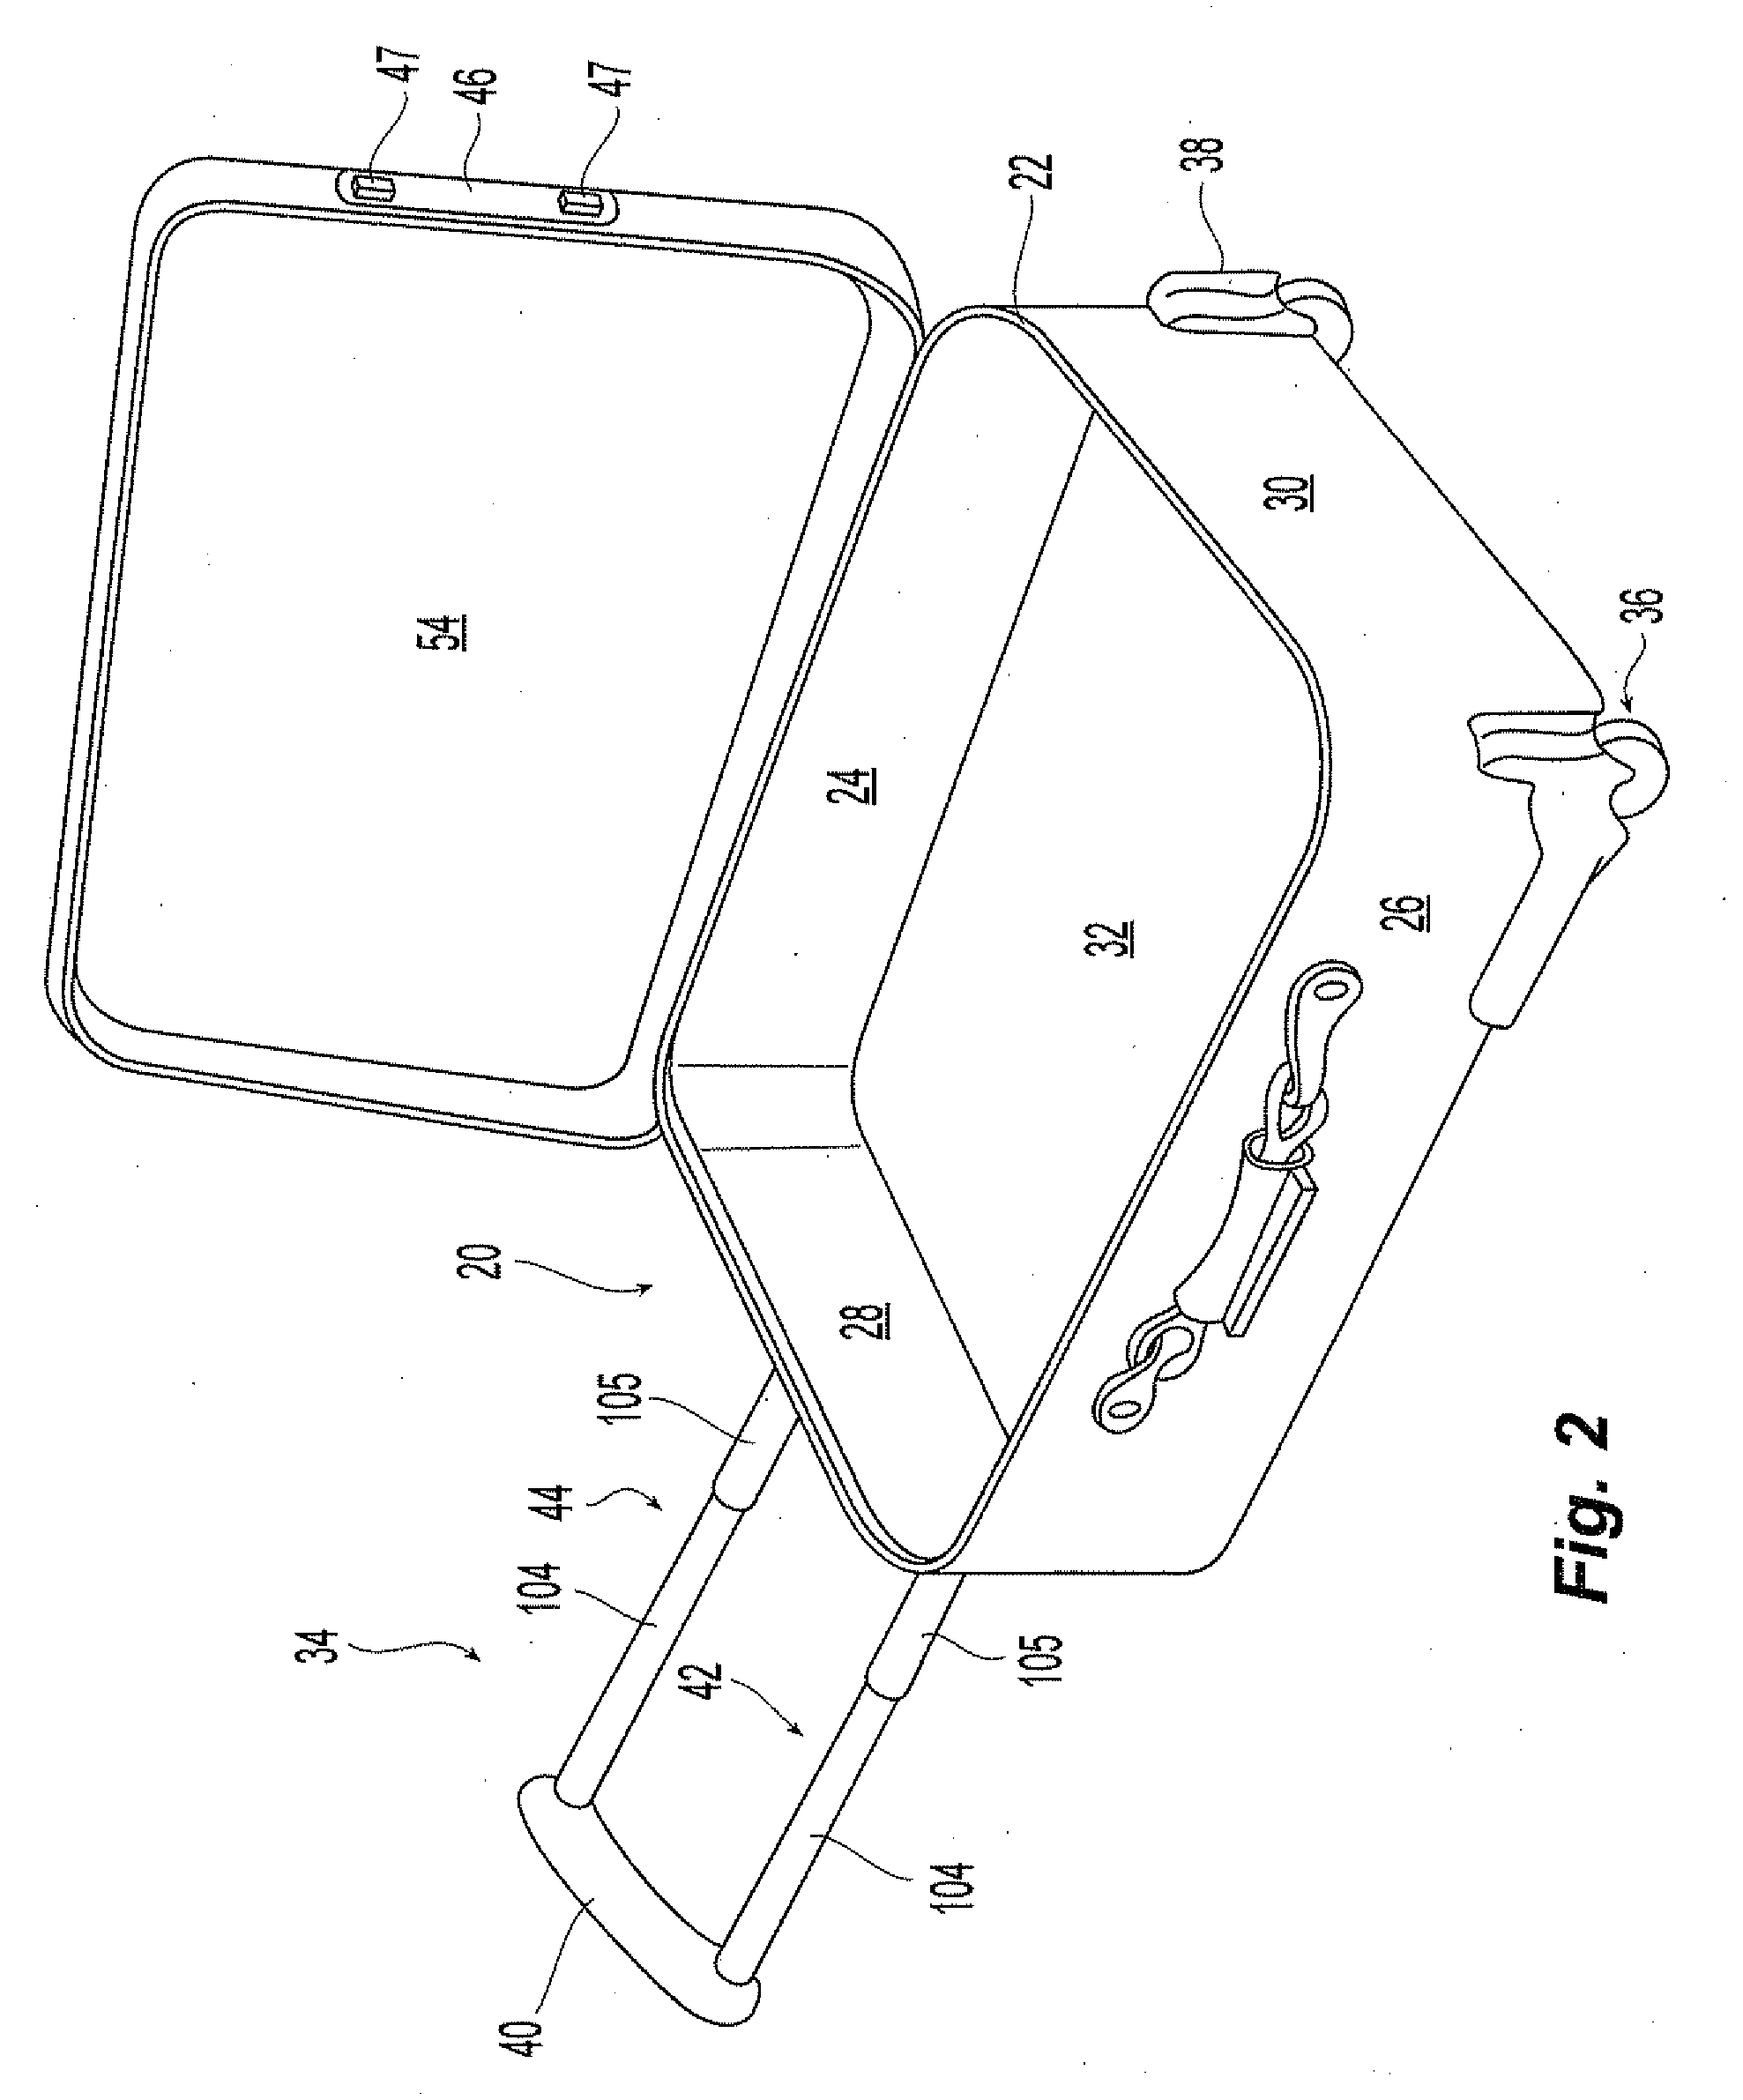 Flat packing suitcase system